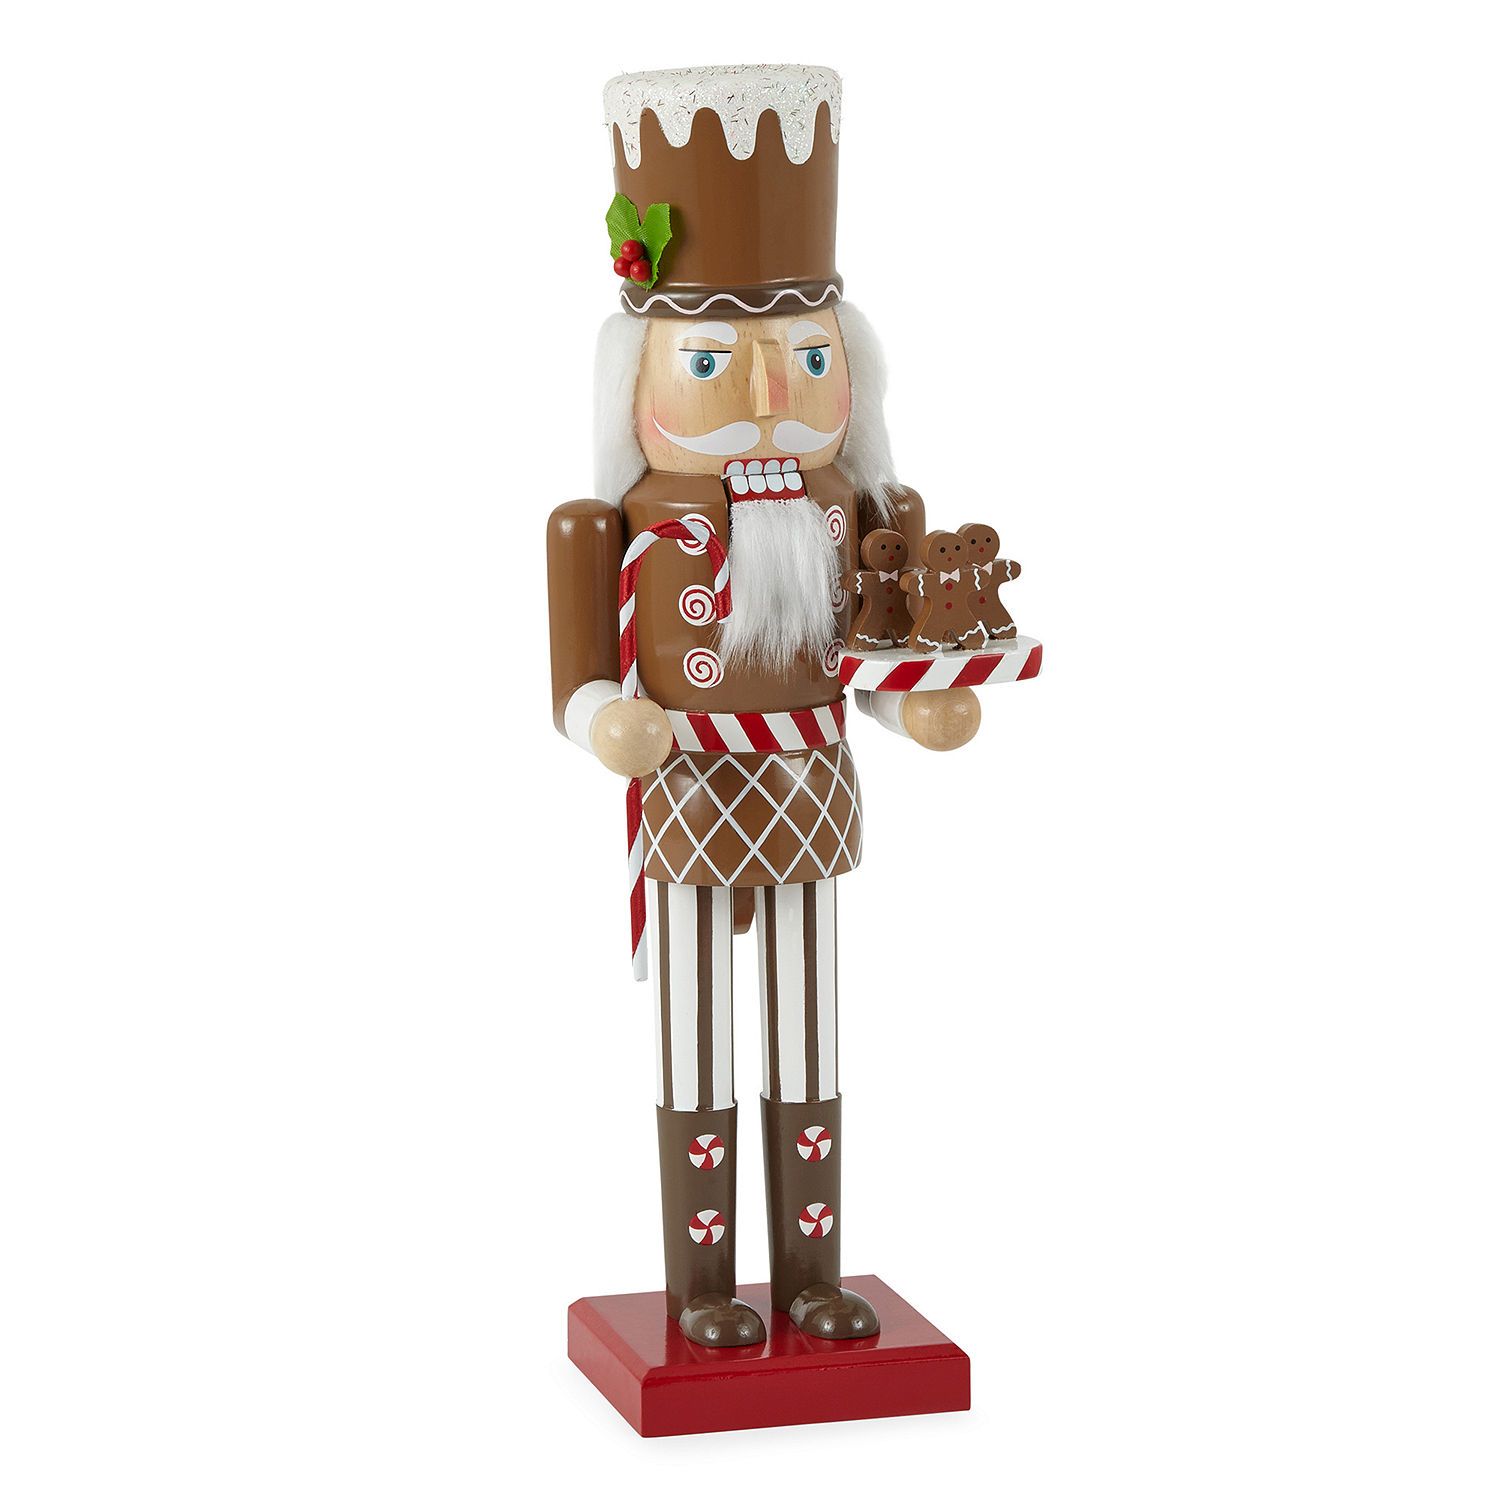 North Pole Trading Co. 14" Gingerbread Soldier Wood Nutcracker | JCPenney